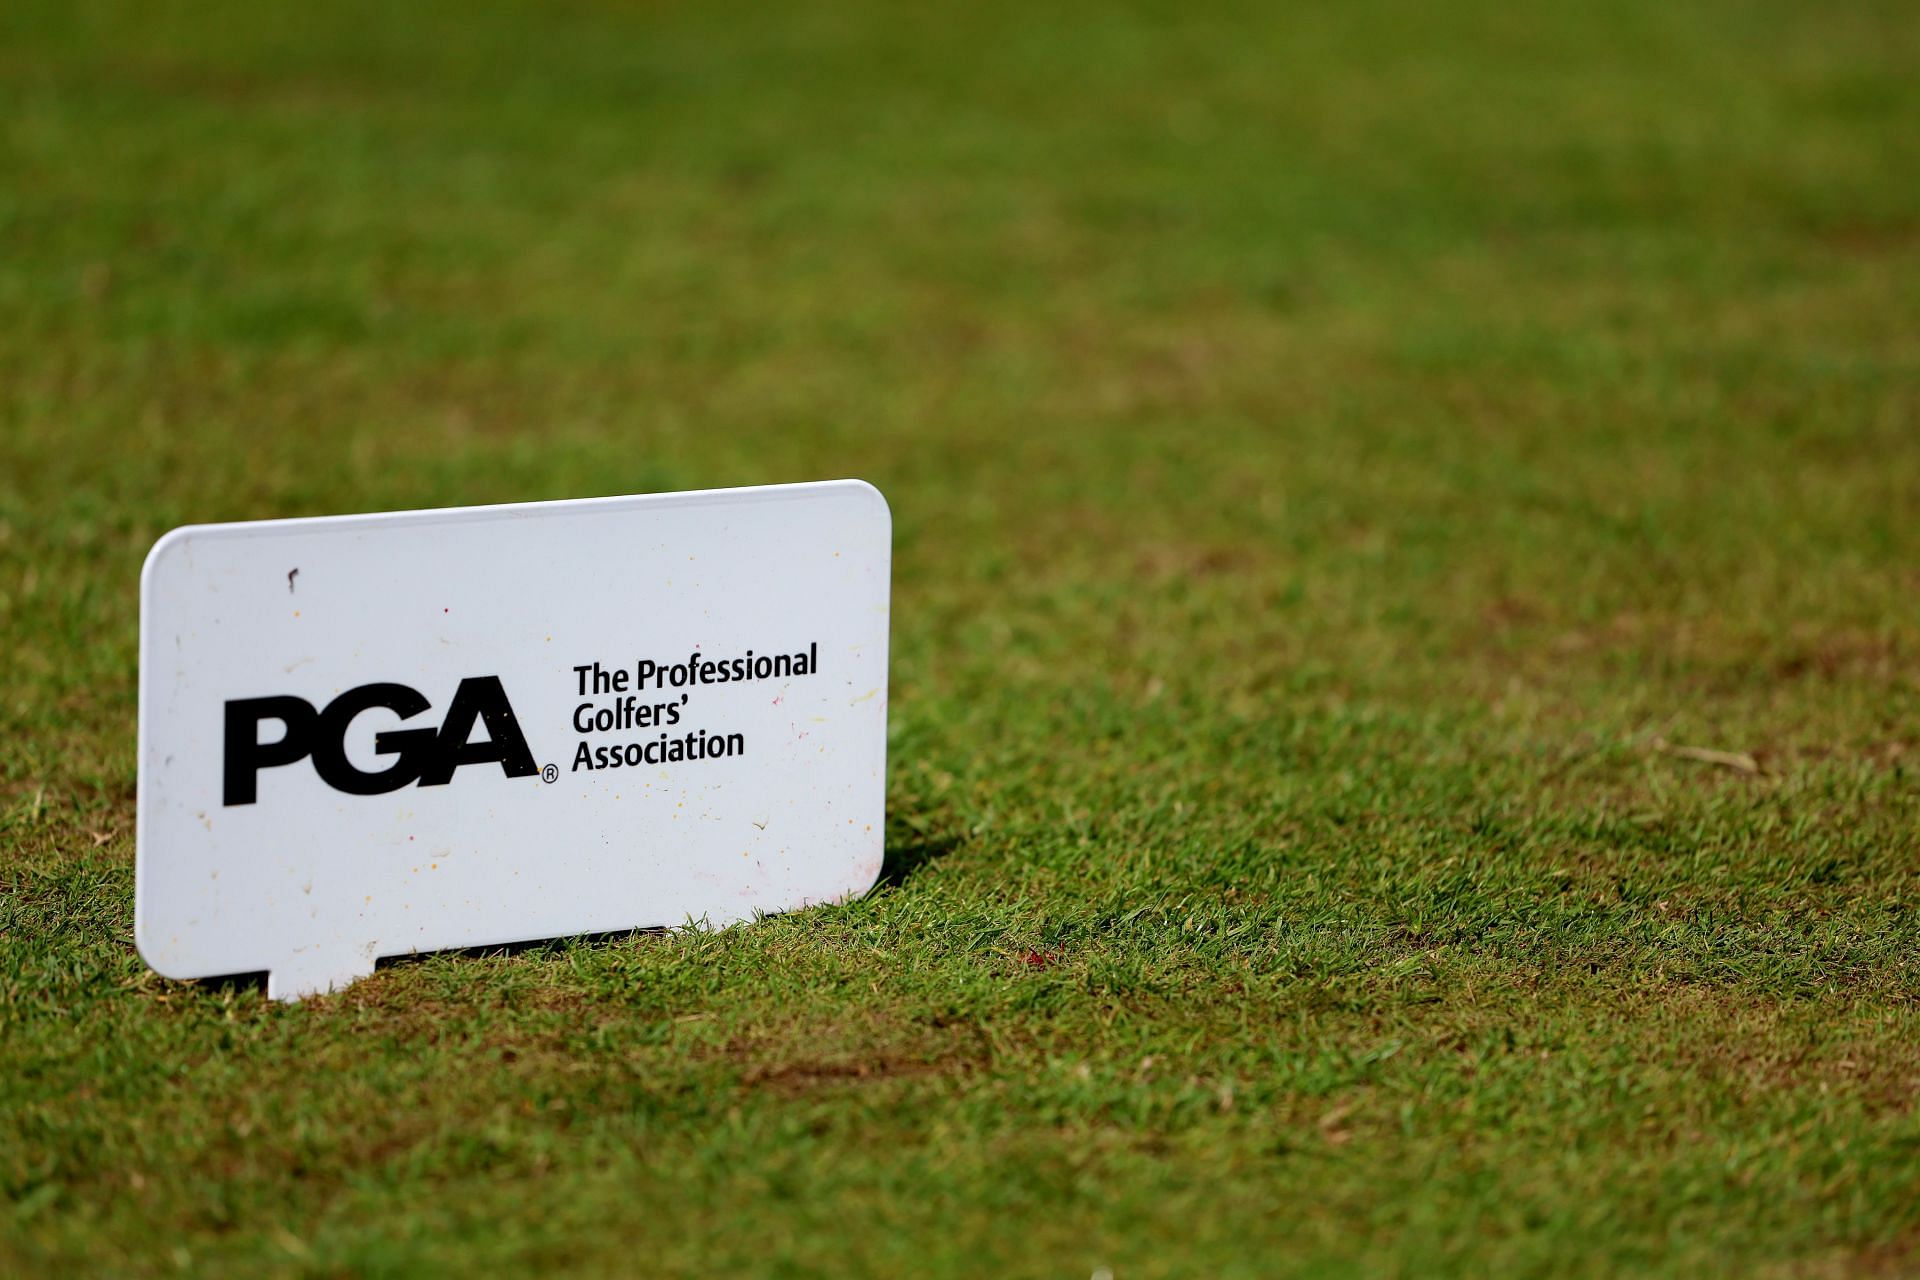 PGA of America implements workforce changes with 20 layoffs, citing